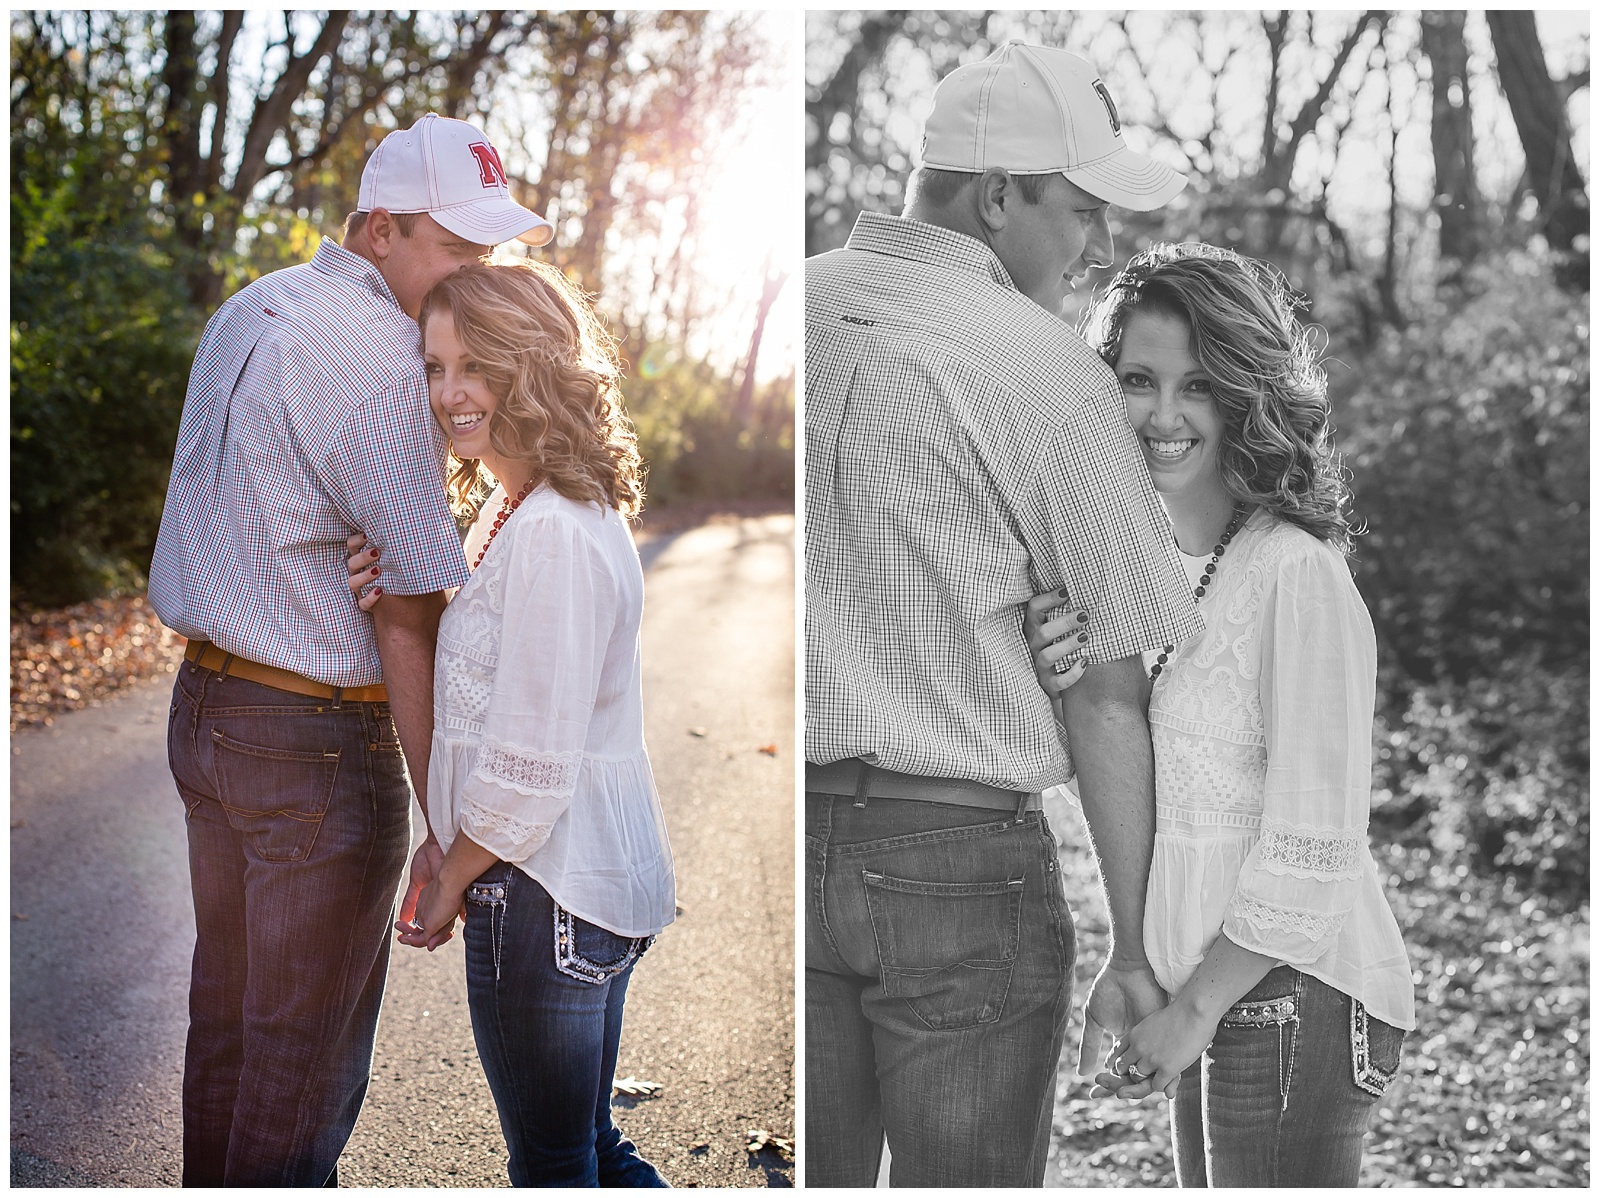 A Unity Village engagement session in Lee's Summit, Missouri.